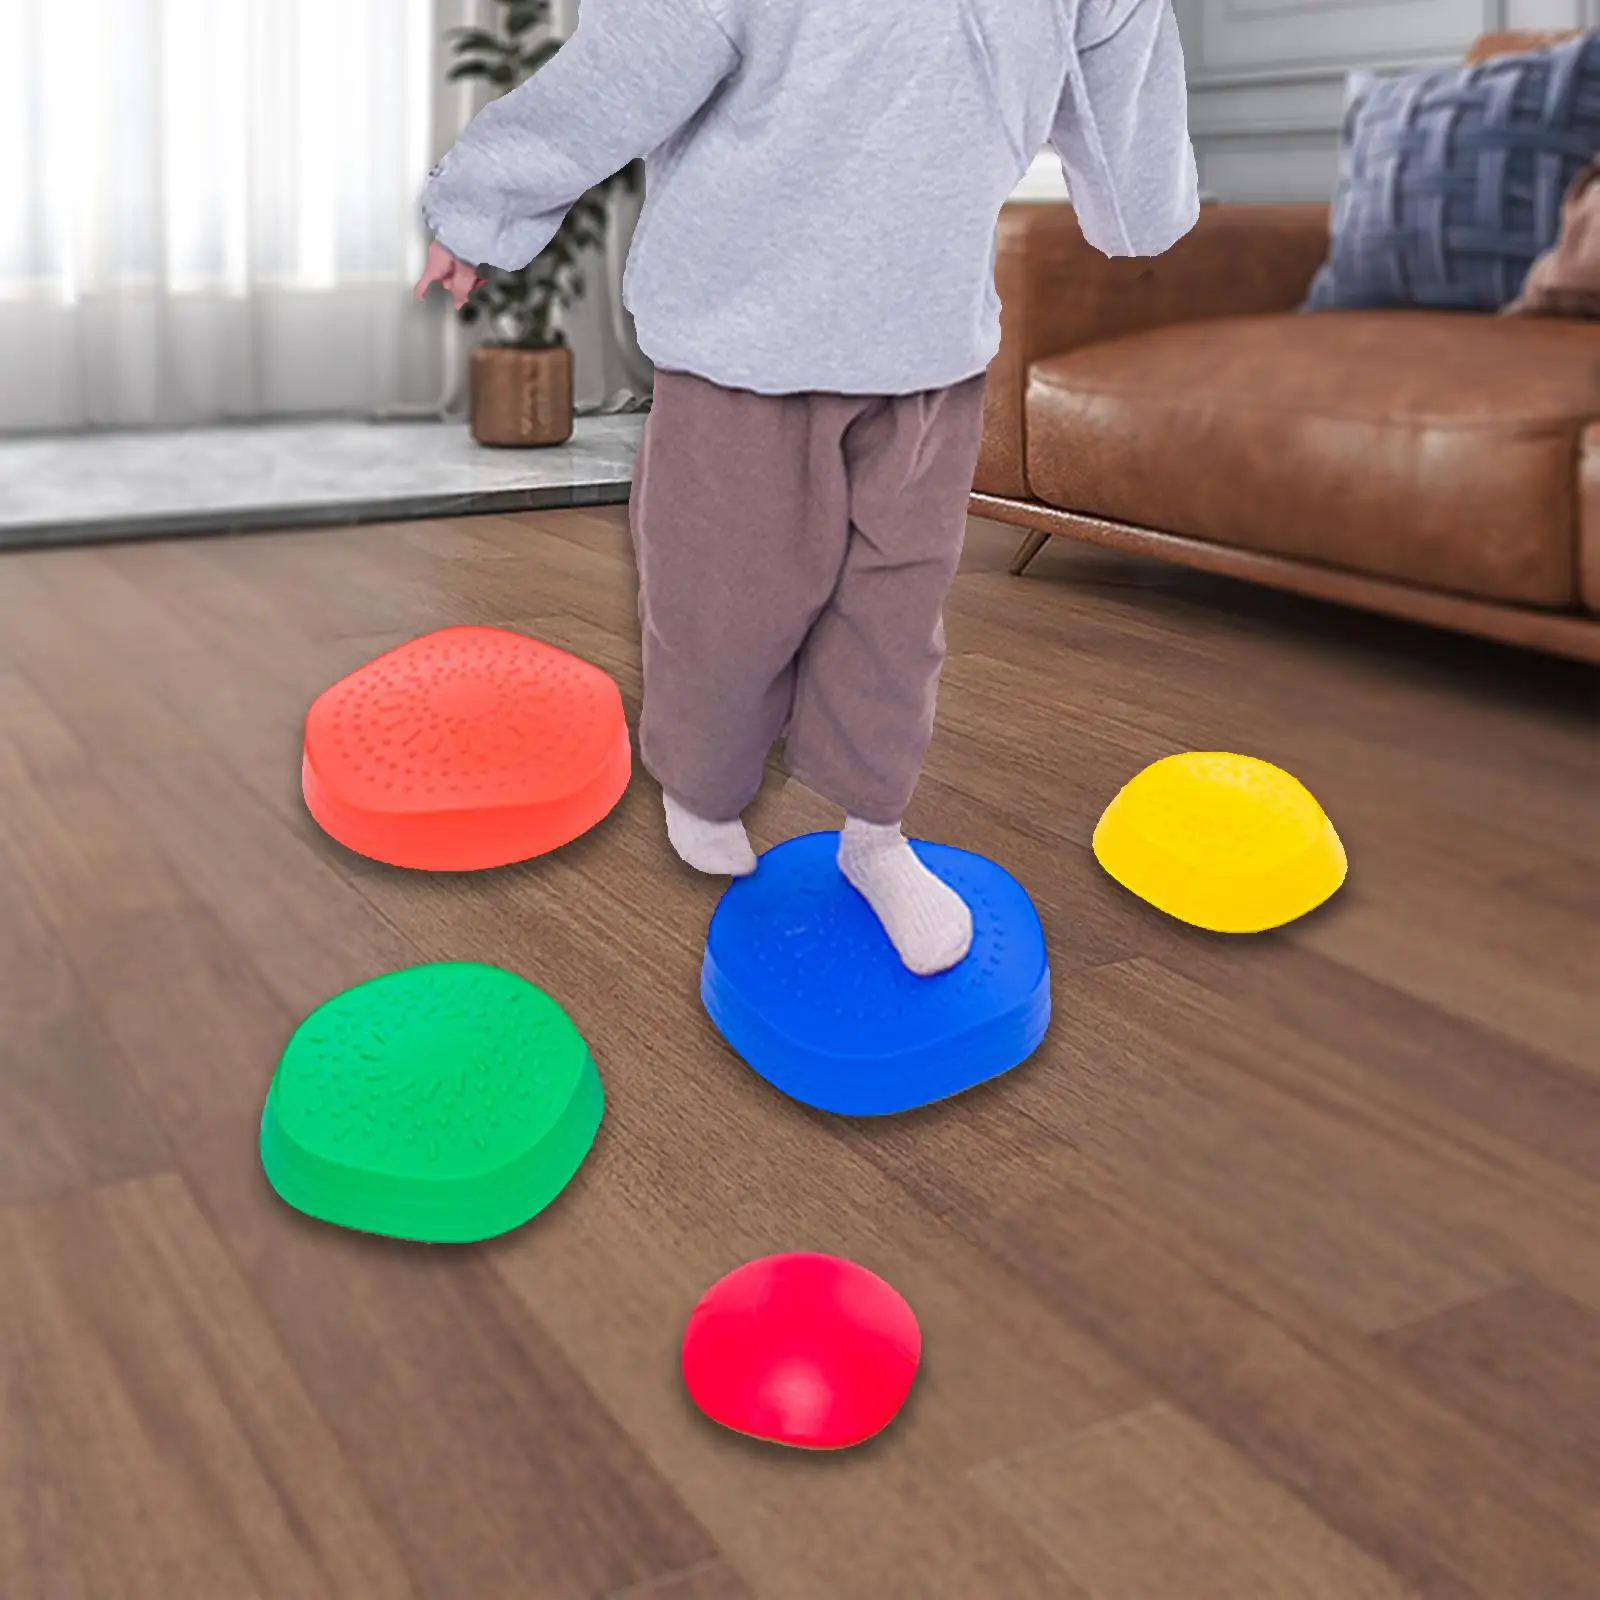 Crossing River Stone Balance Stepping Stones for Children Boys Girls Ages 3+